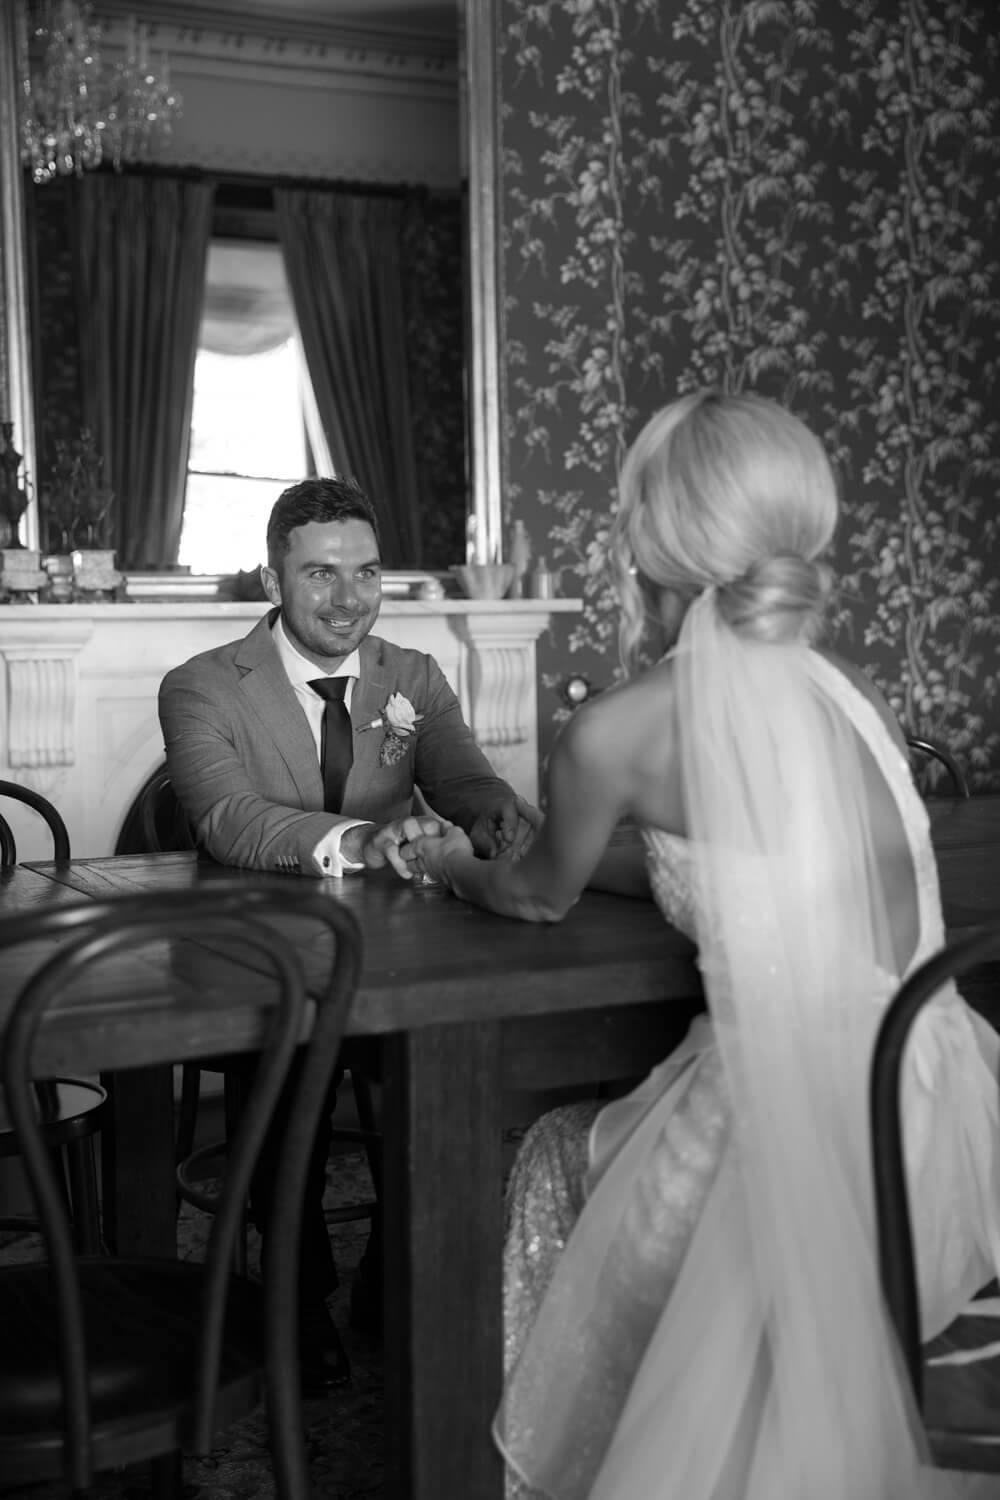 ash and andrew holding hands across the table at thei wallalong house wedding